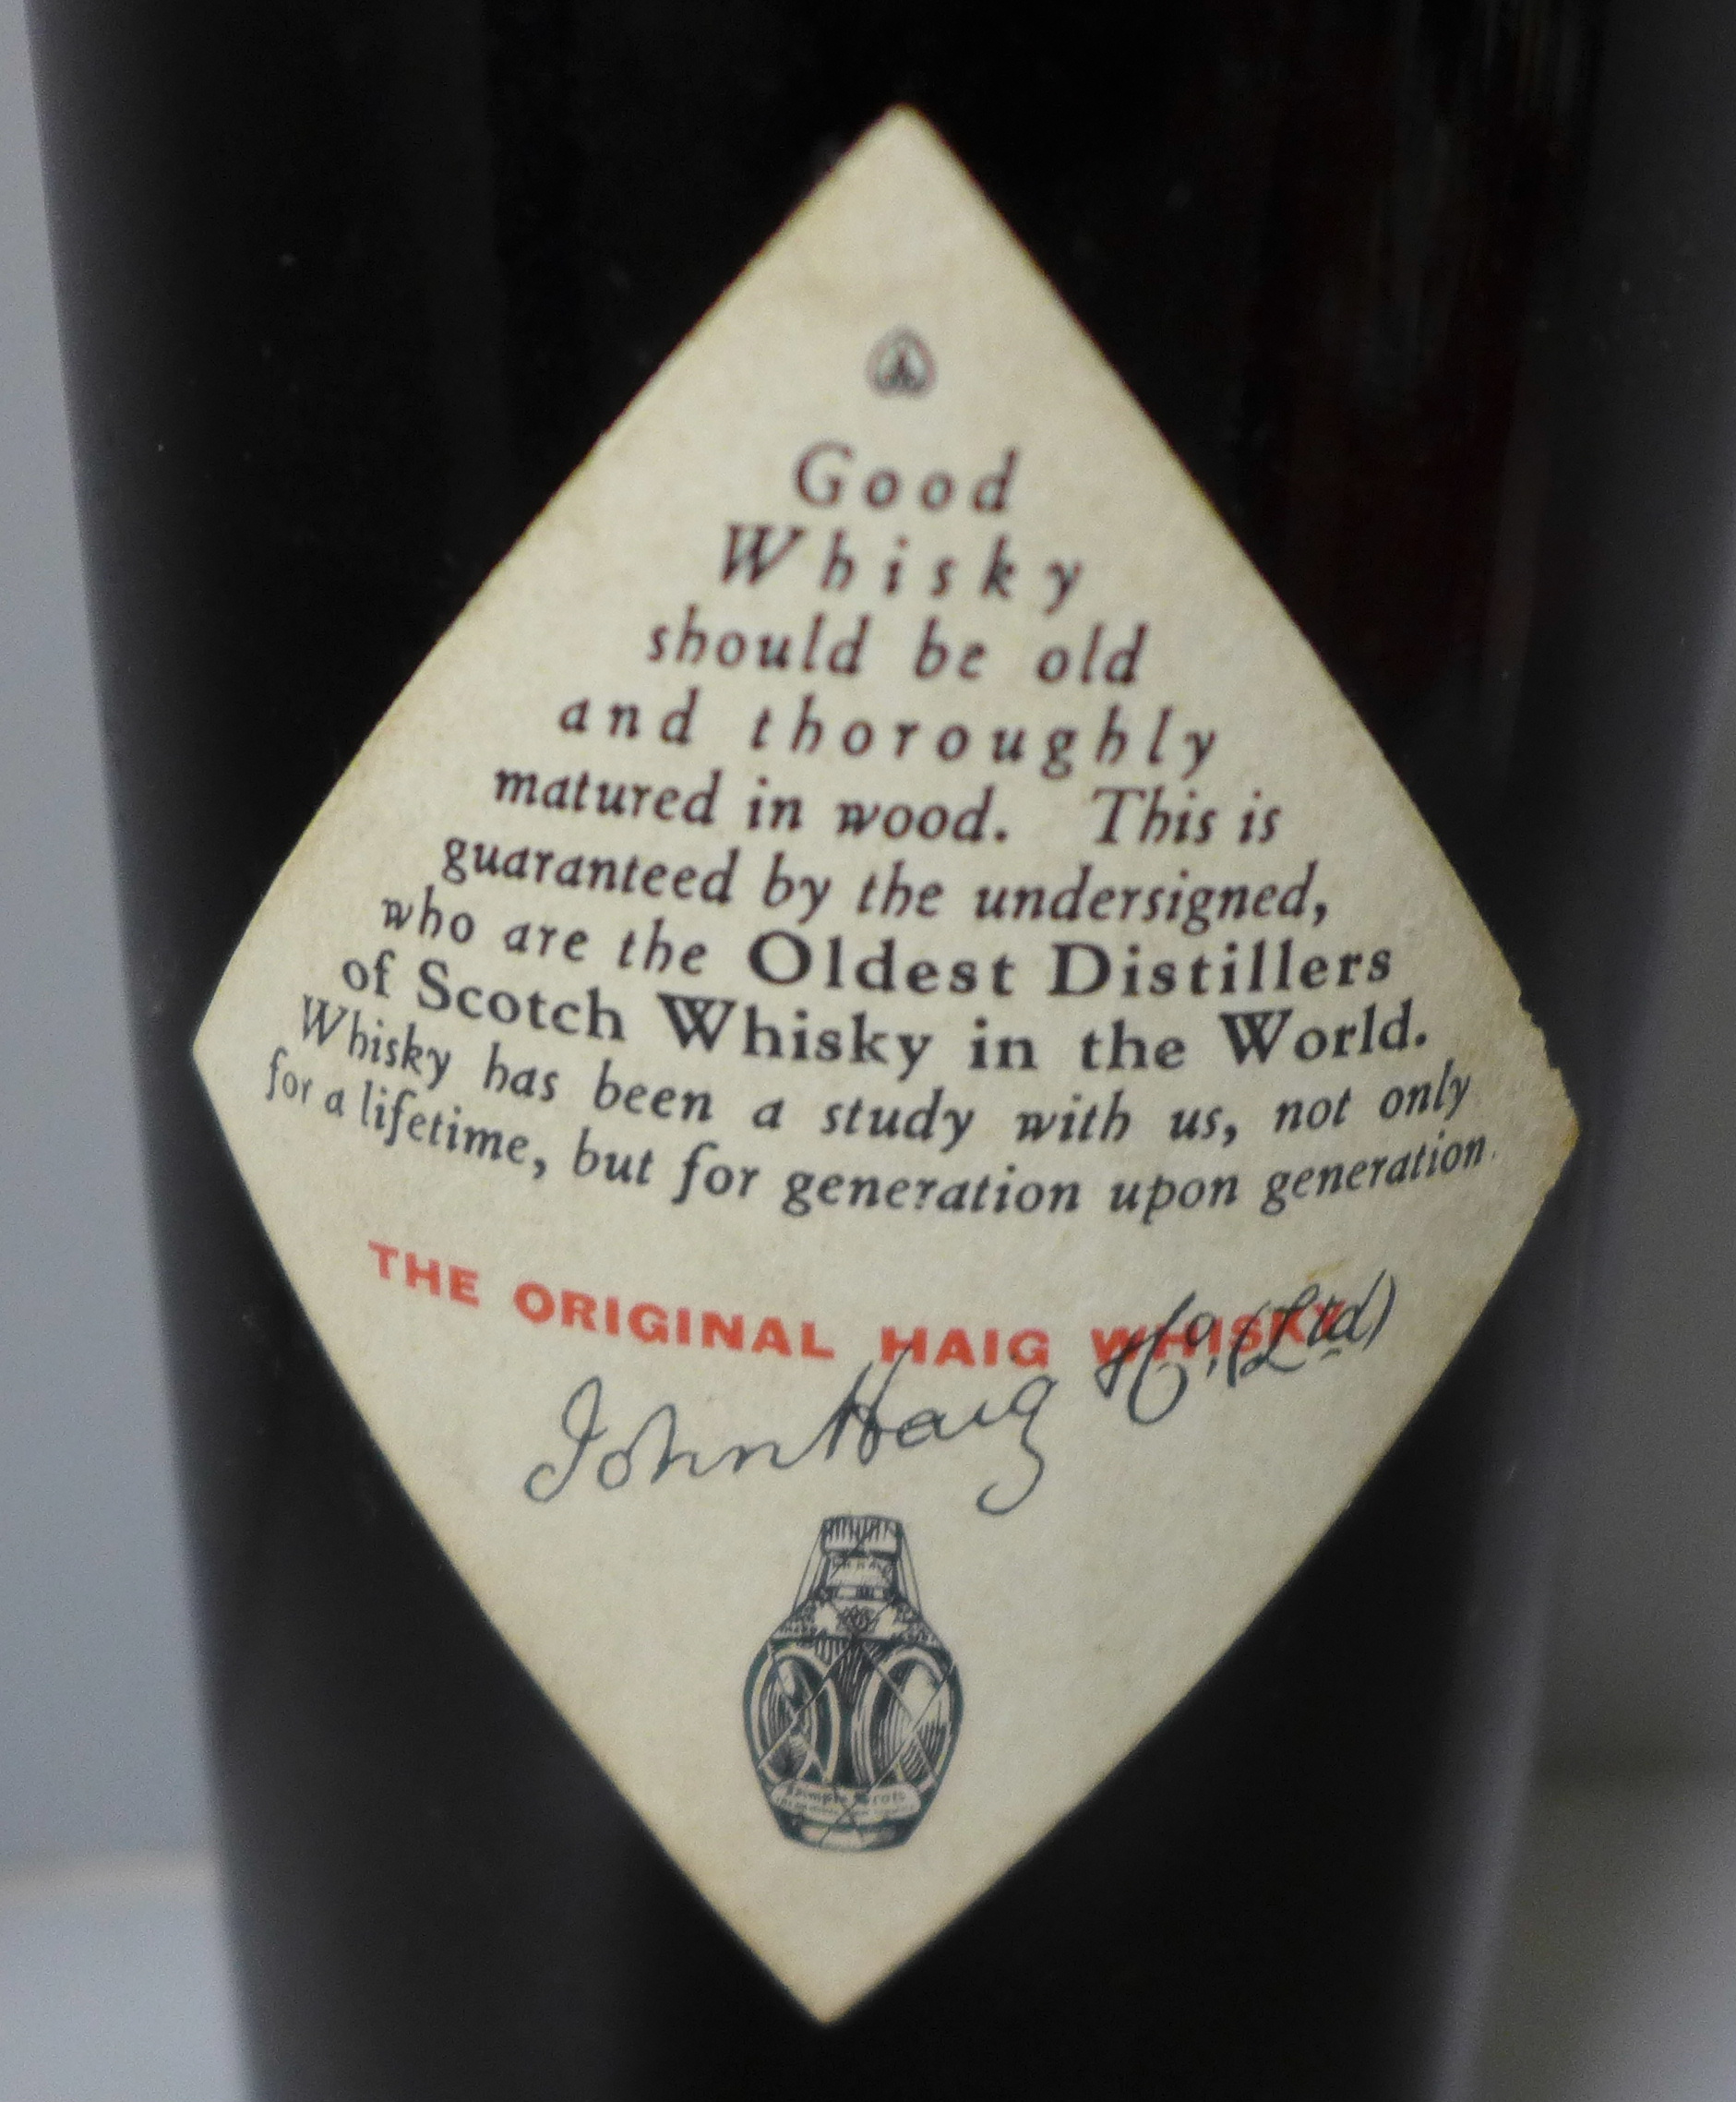 A Haig's Gold Label bottle of whisky - Image 3 of 3